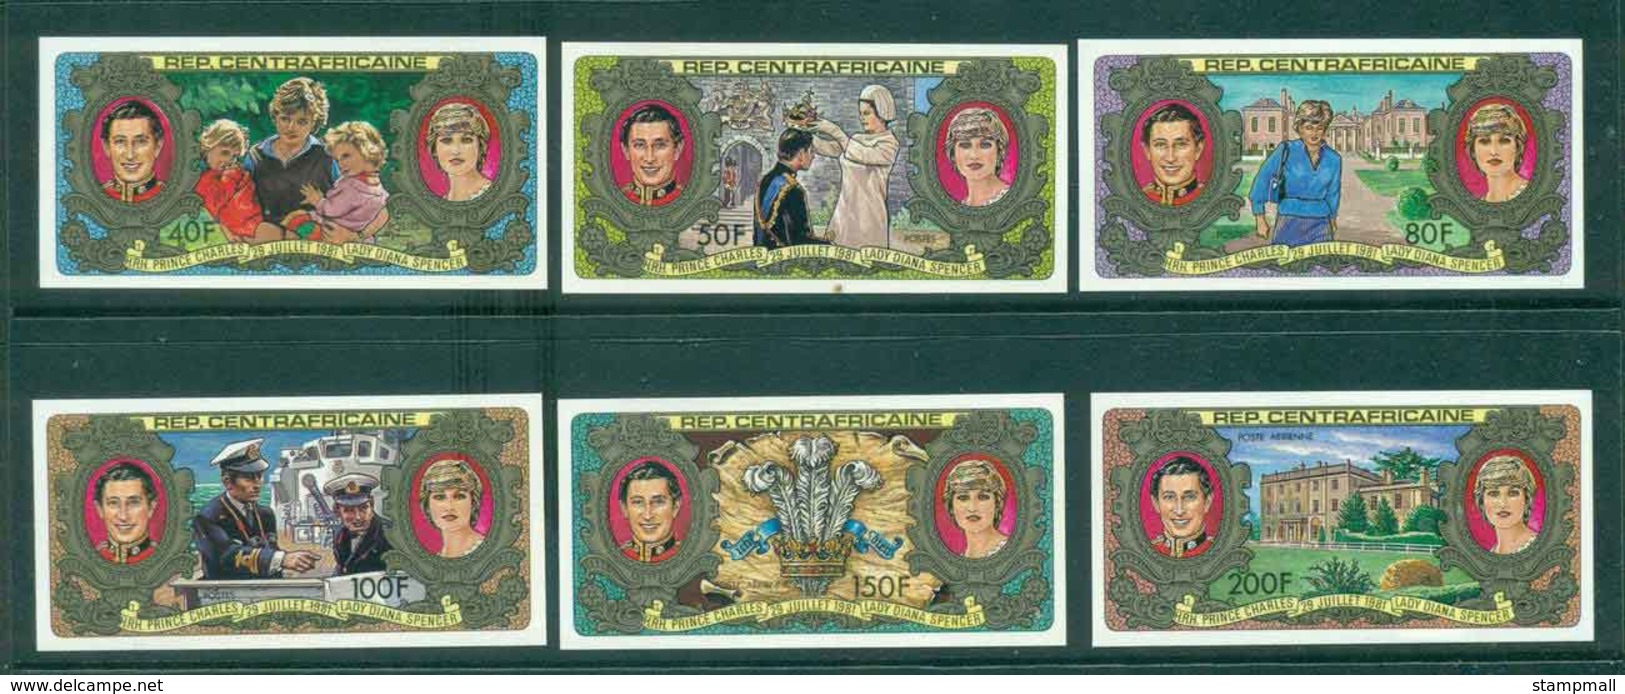 Central African Republic 1981 Charles & Diana Wedding IMPERF MUH Lot44889 - Centraal-Afrikaanse Republiek